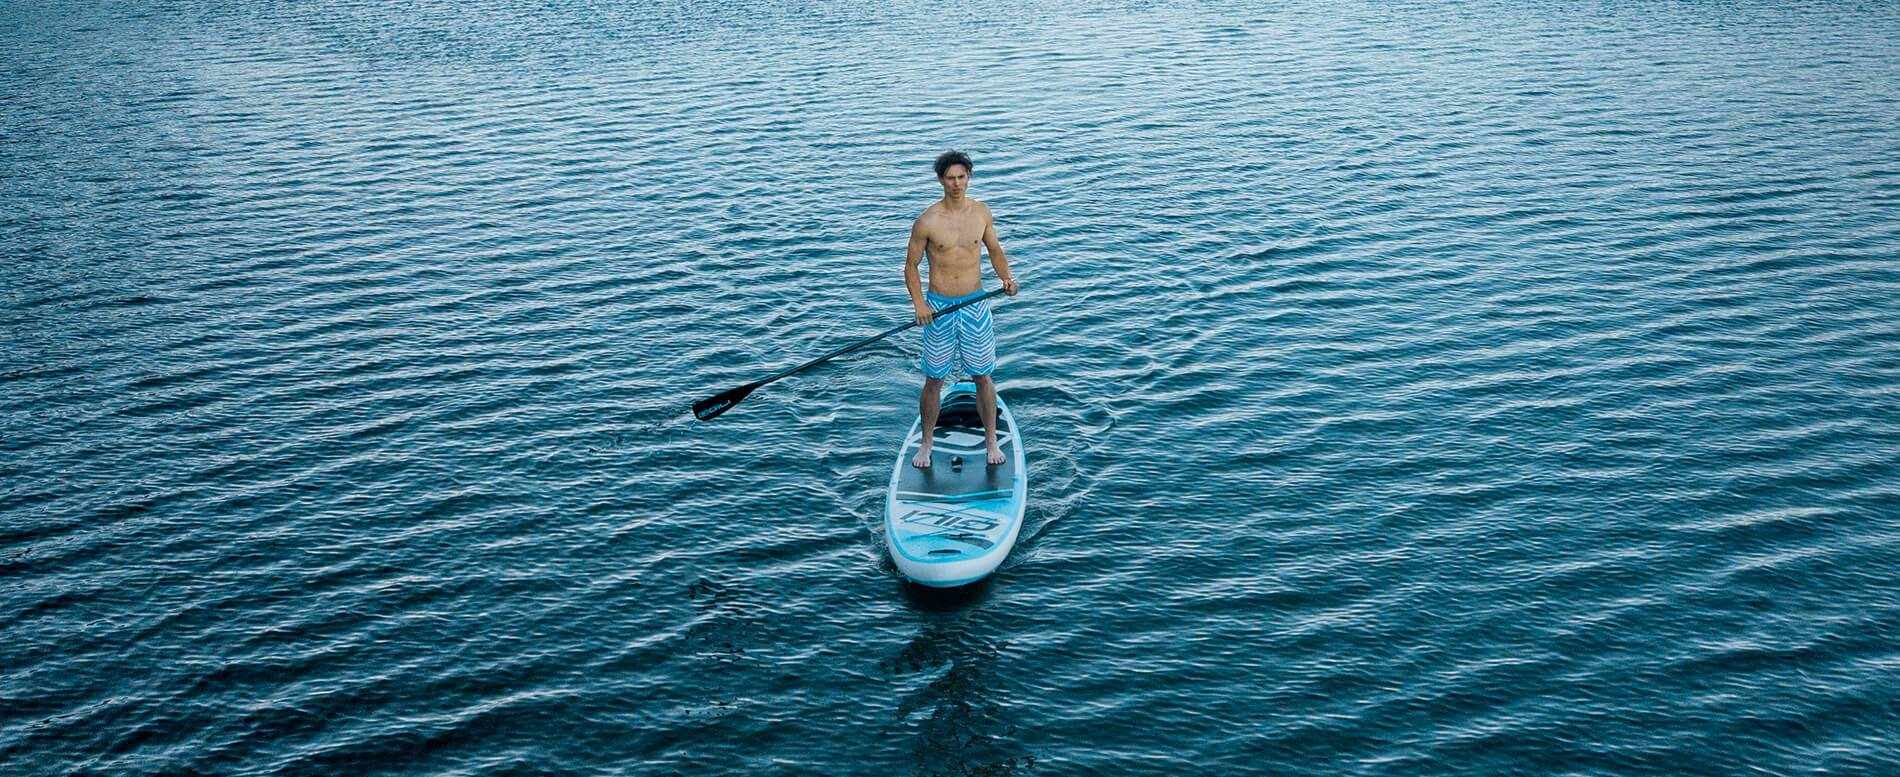 How to Paddle Board: The Beginner’s Guide to SUP Basics